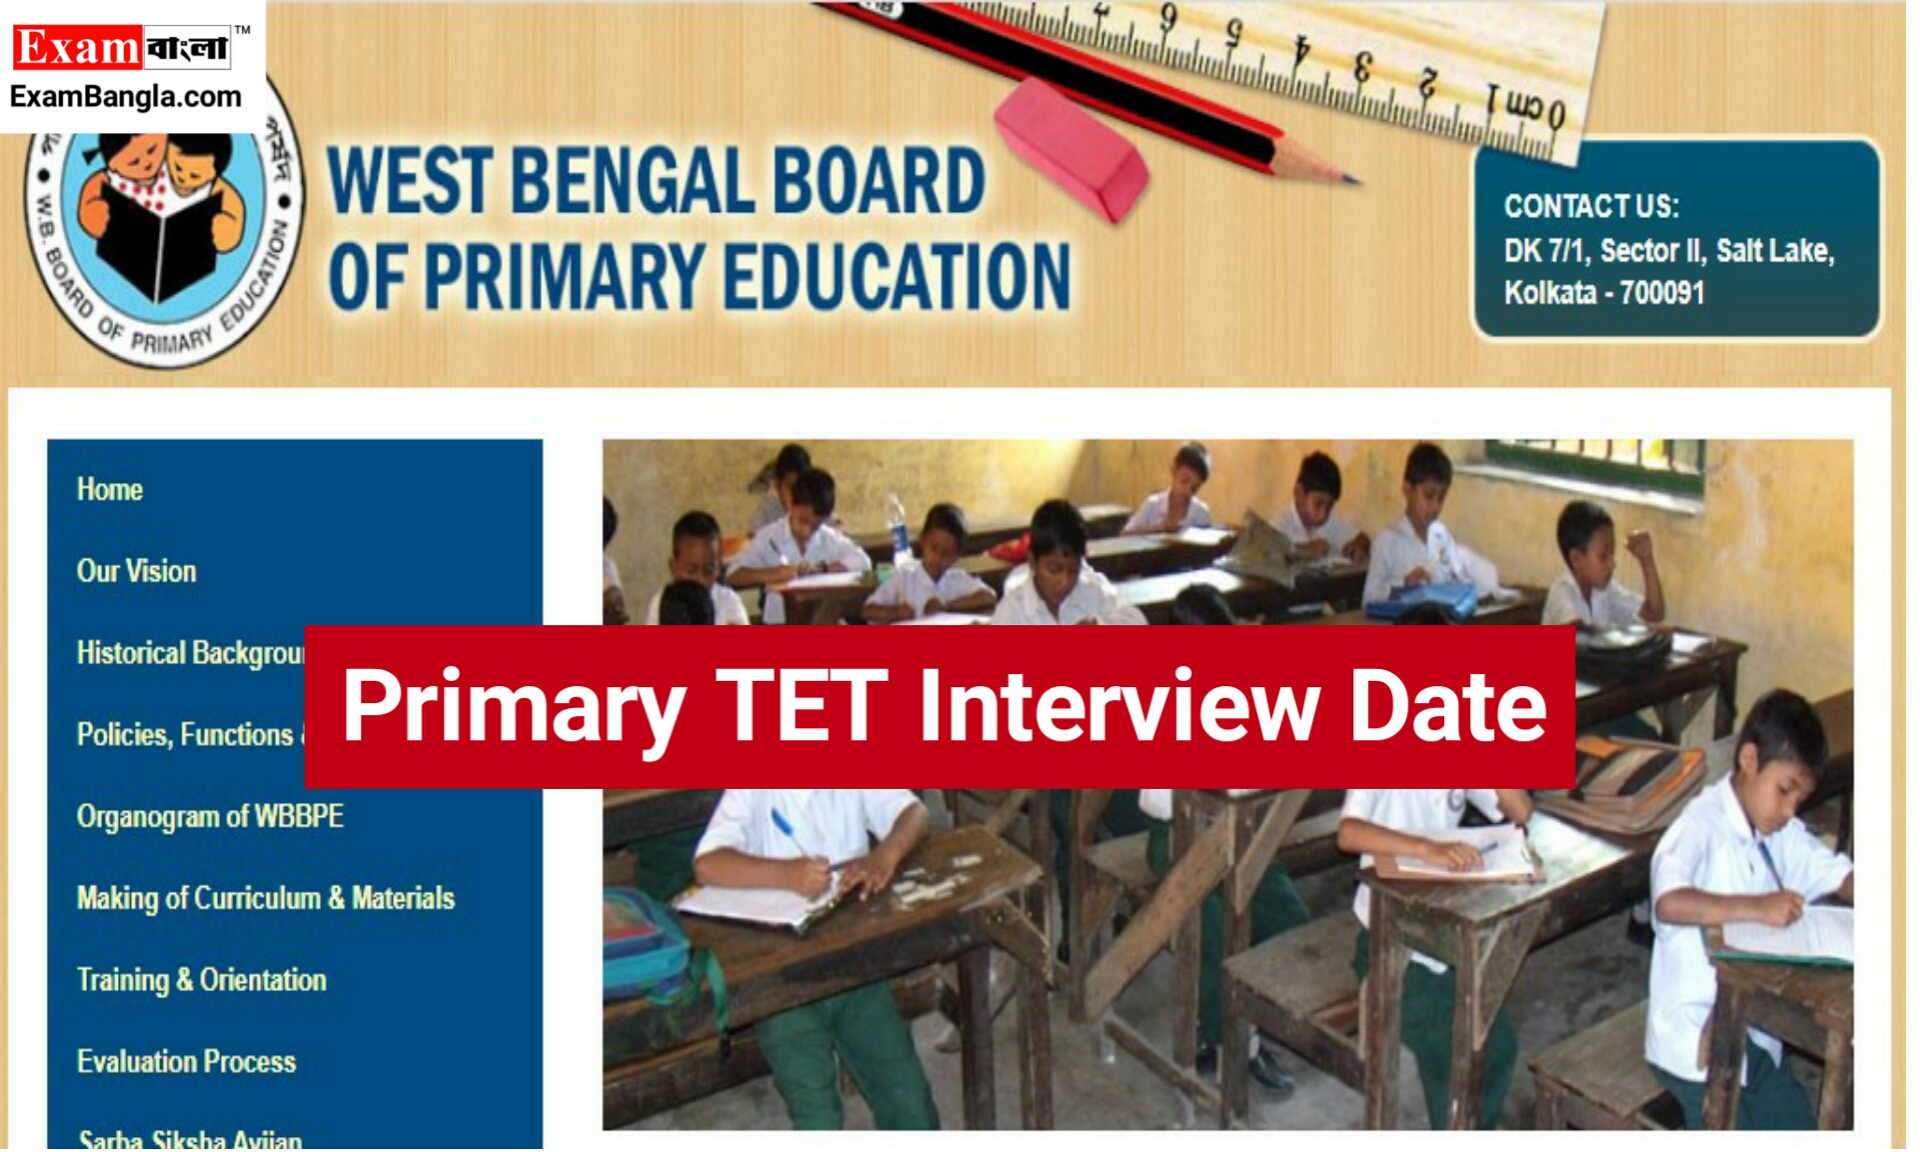 Primary TET Interview Date